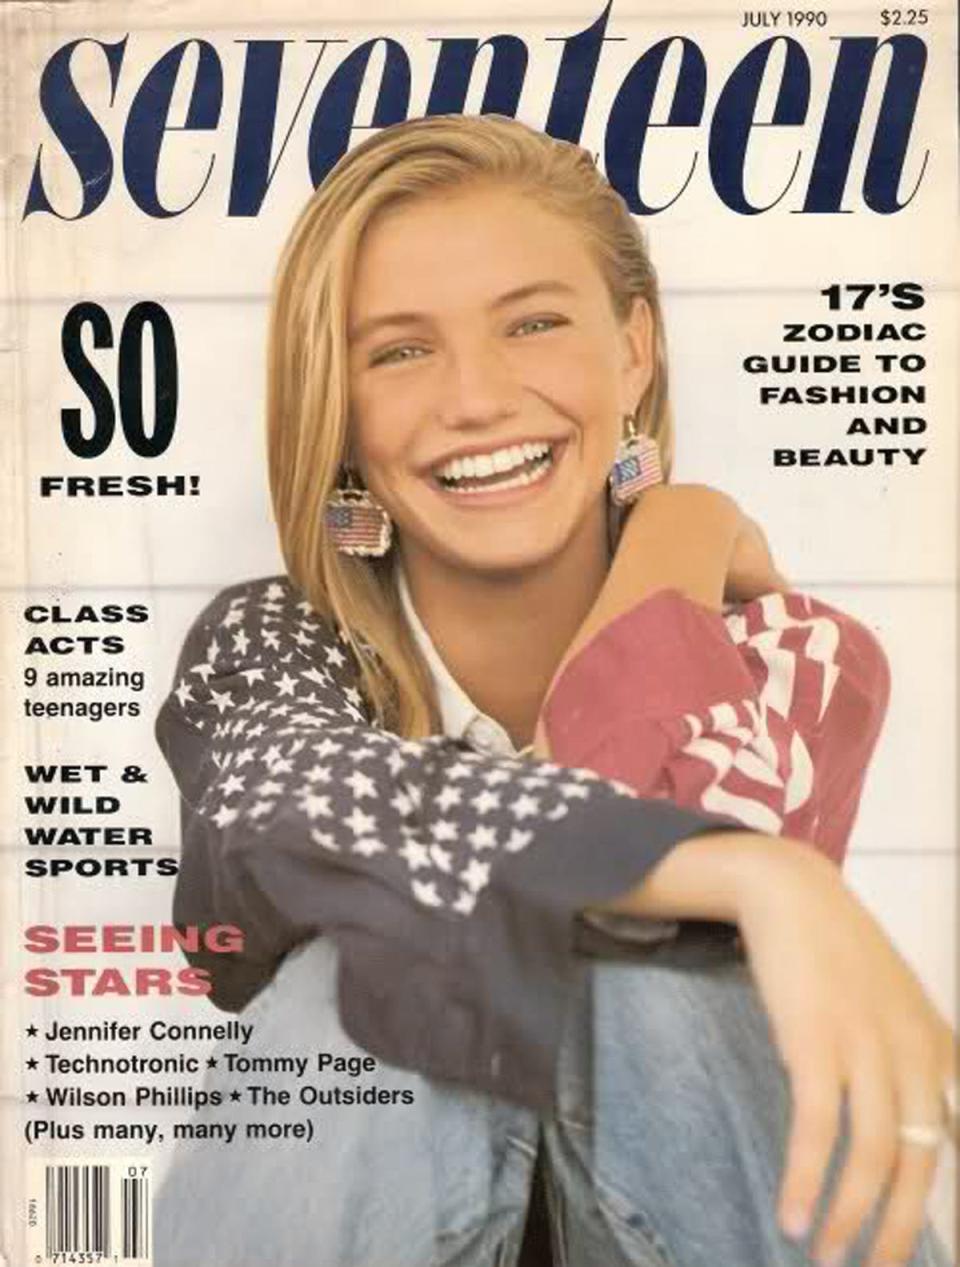 Cameron Diaz on the cover of Seventeen magazine.